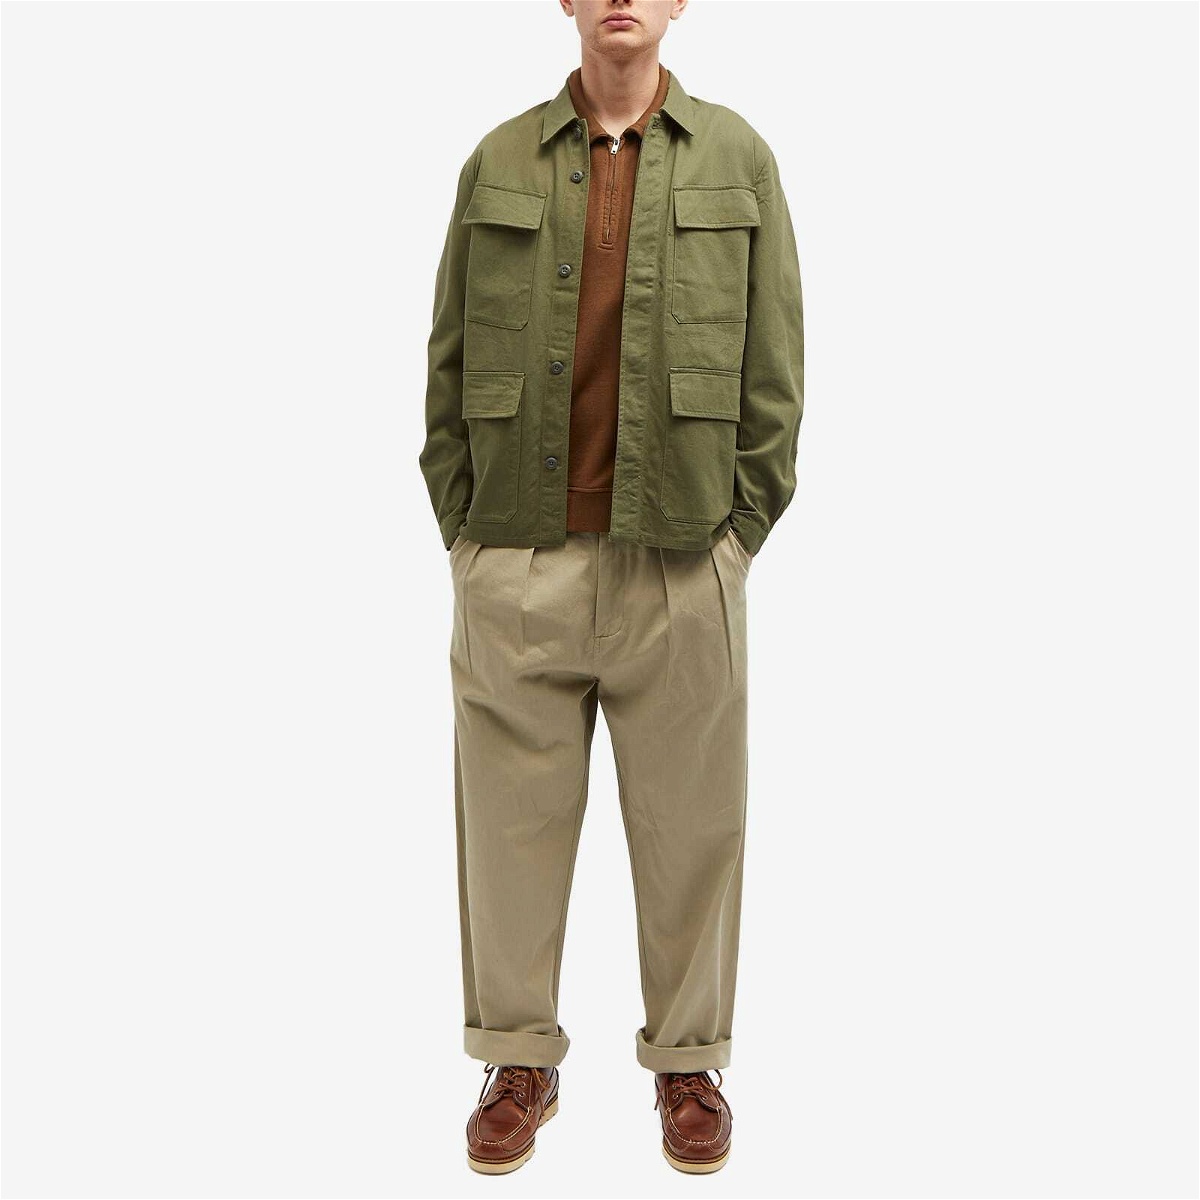 Universal Works Men's Twill Fatigue Jacket in Light Olive Universal Works